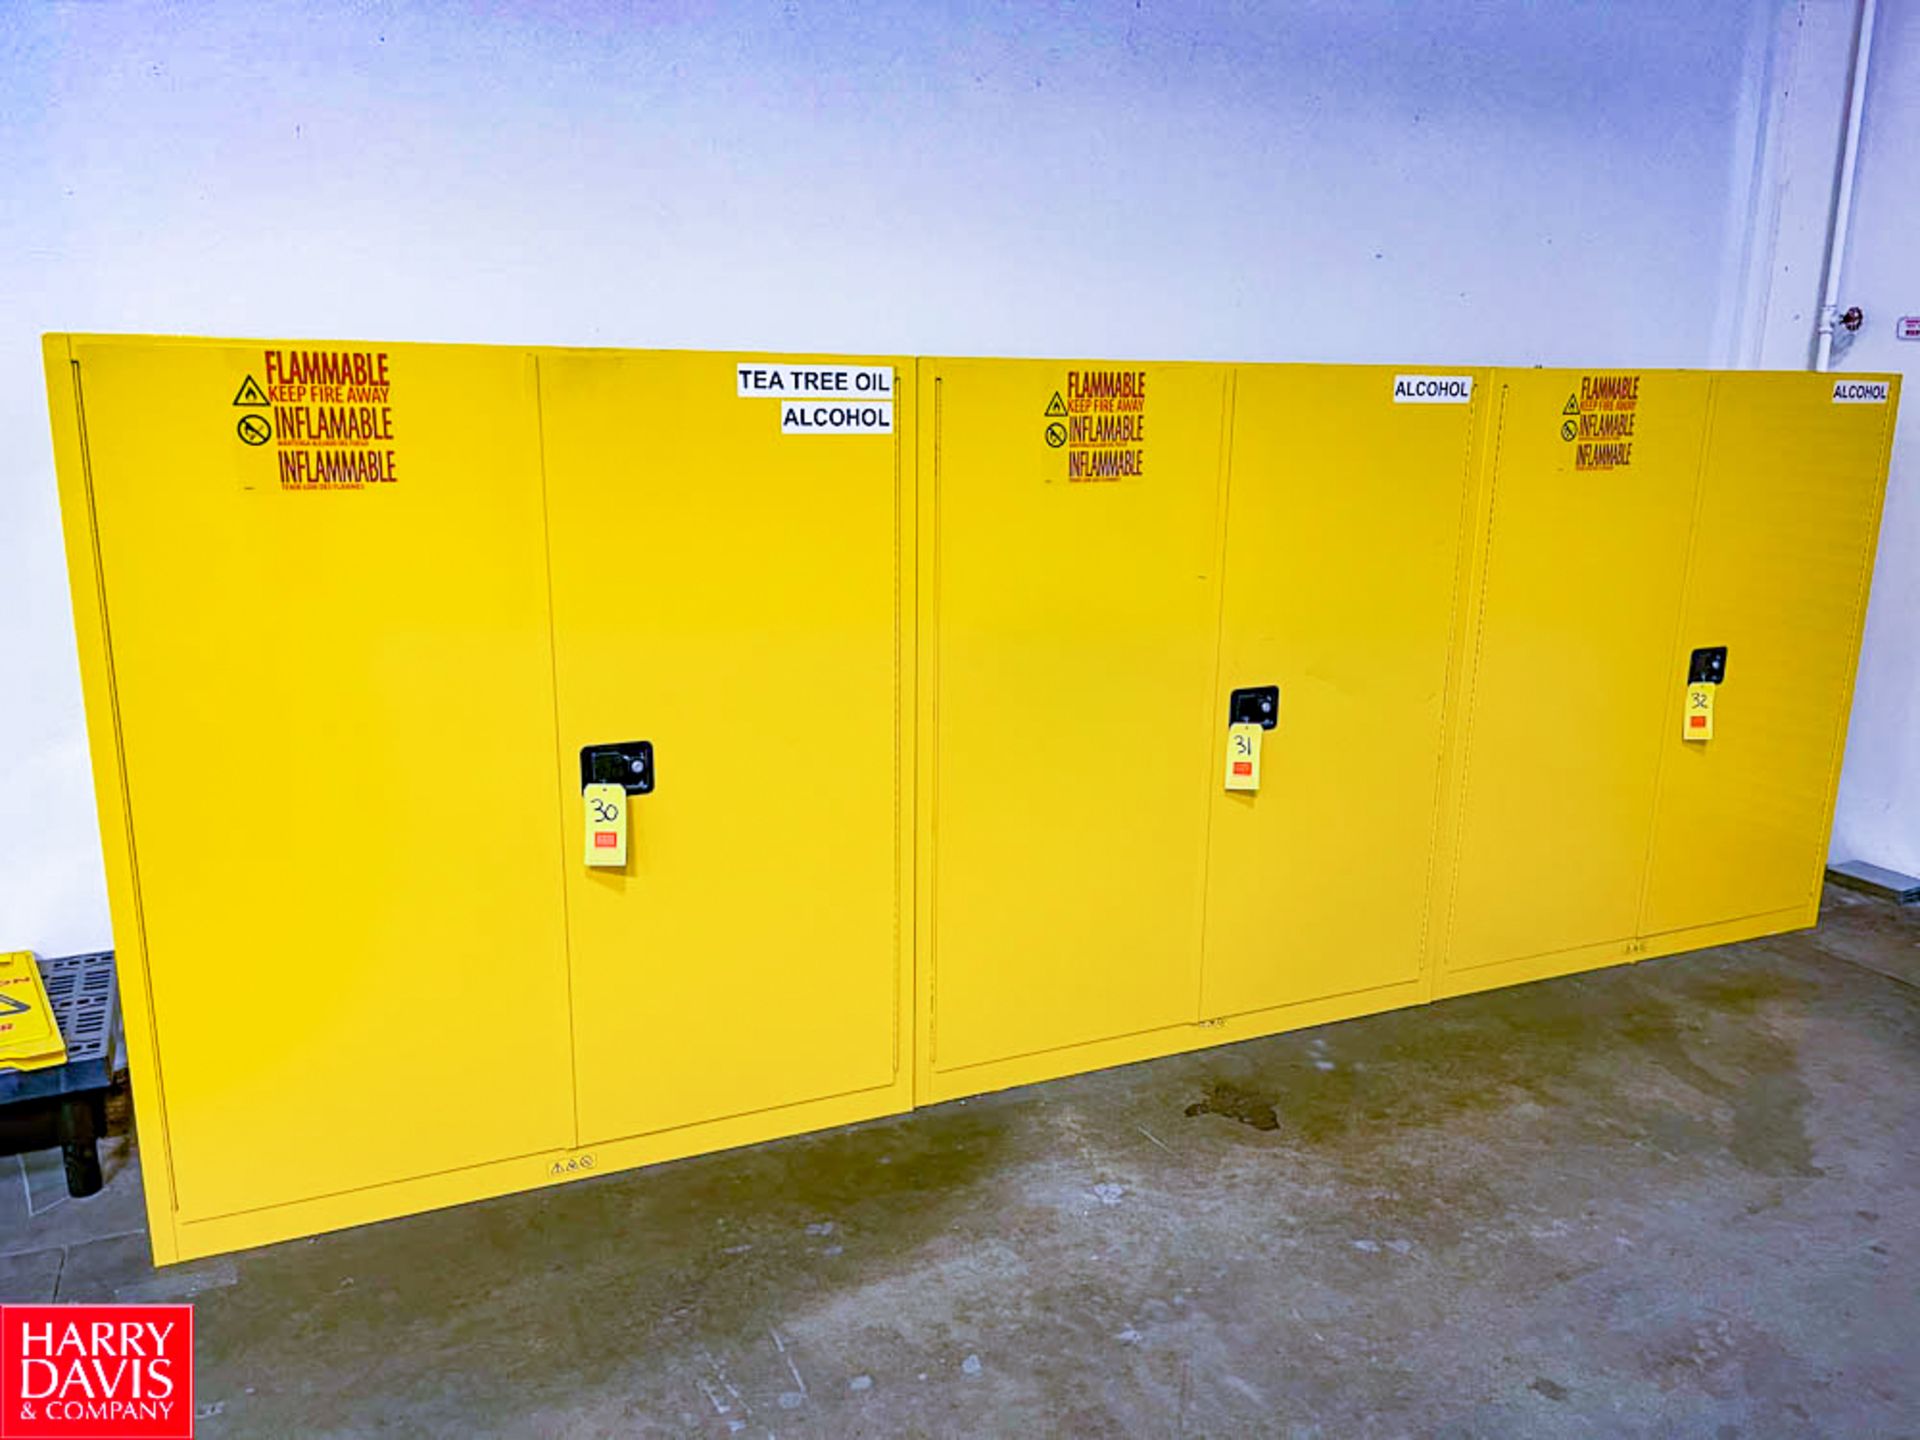 Eagle 120 Gallon Capacity Flammable Storage Cabinet, 59" Width x 65" Height x 34" Depth. Rigging - Image 2 of 2